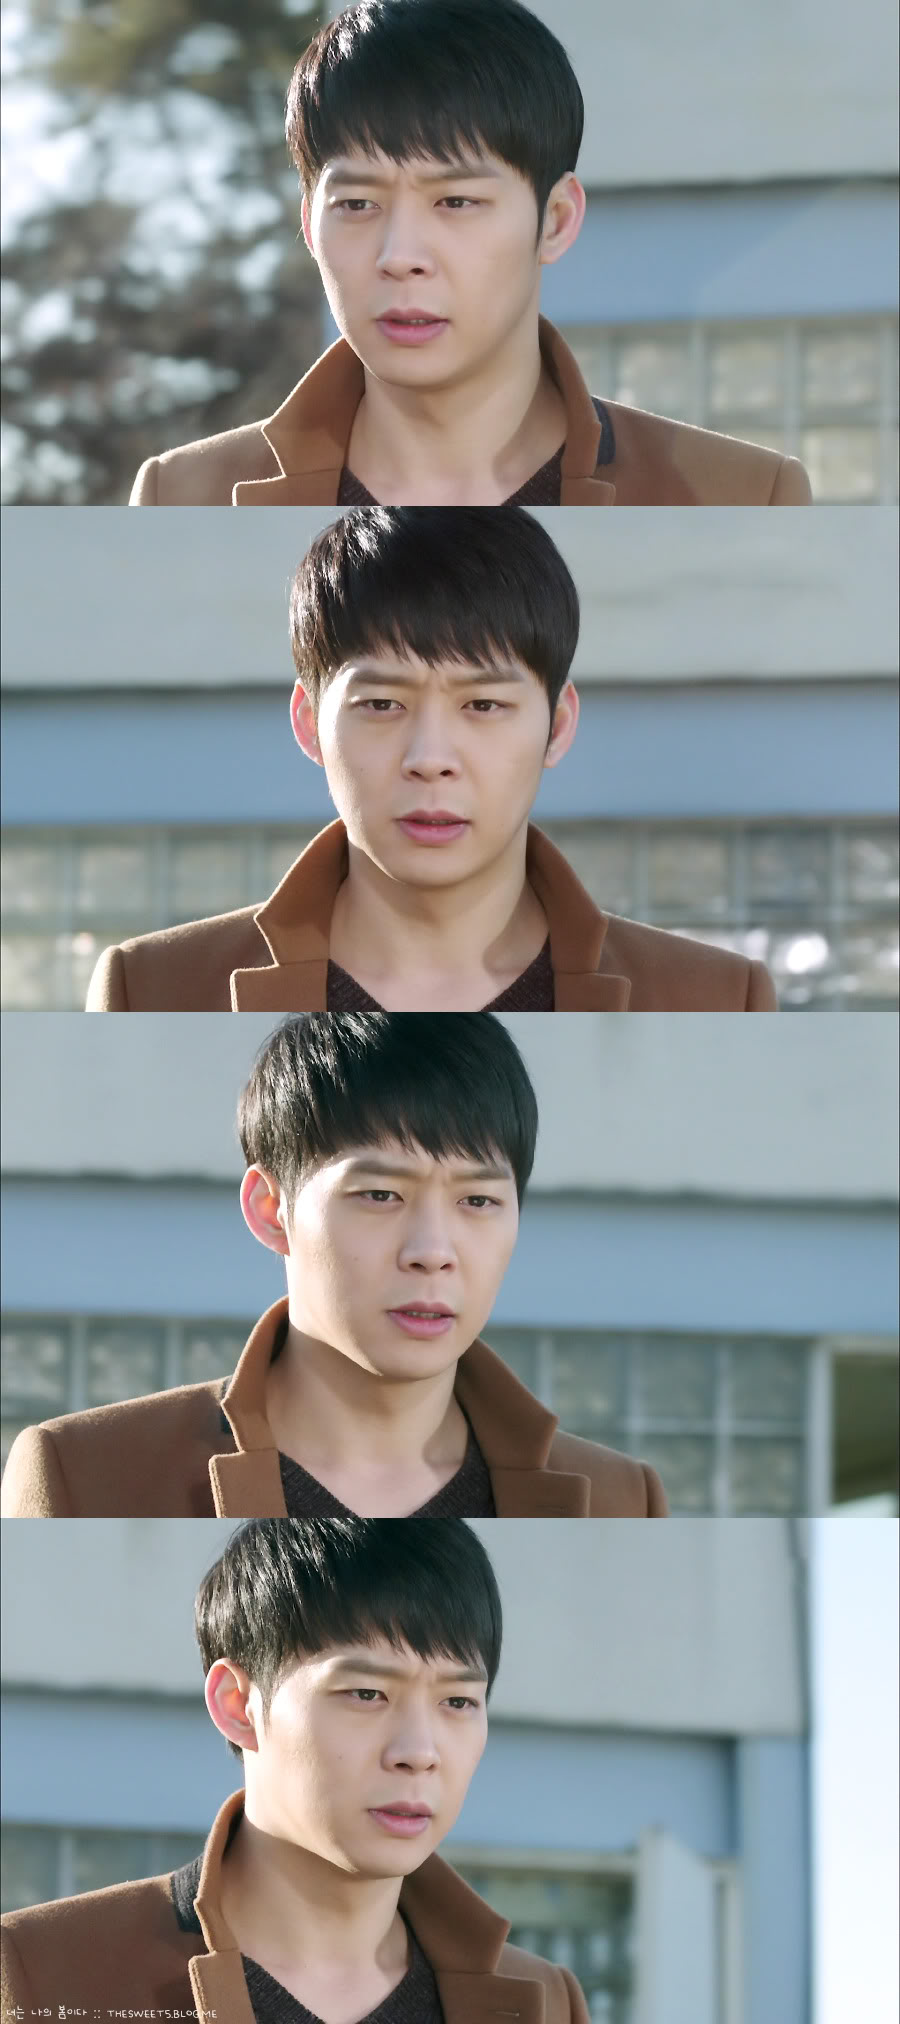 [Collection] Yoochun - I MISS YOU Untitled-68